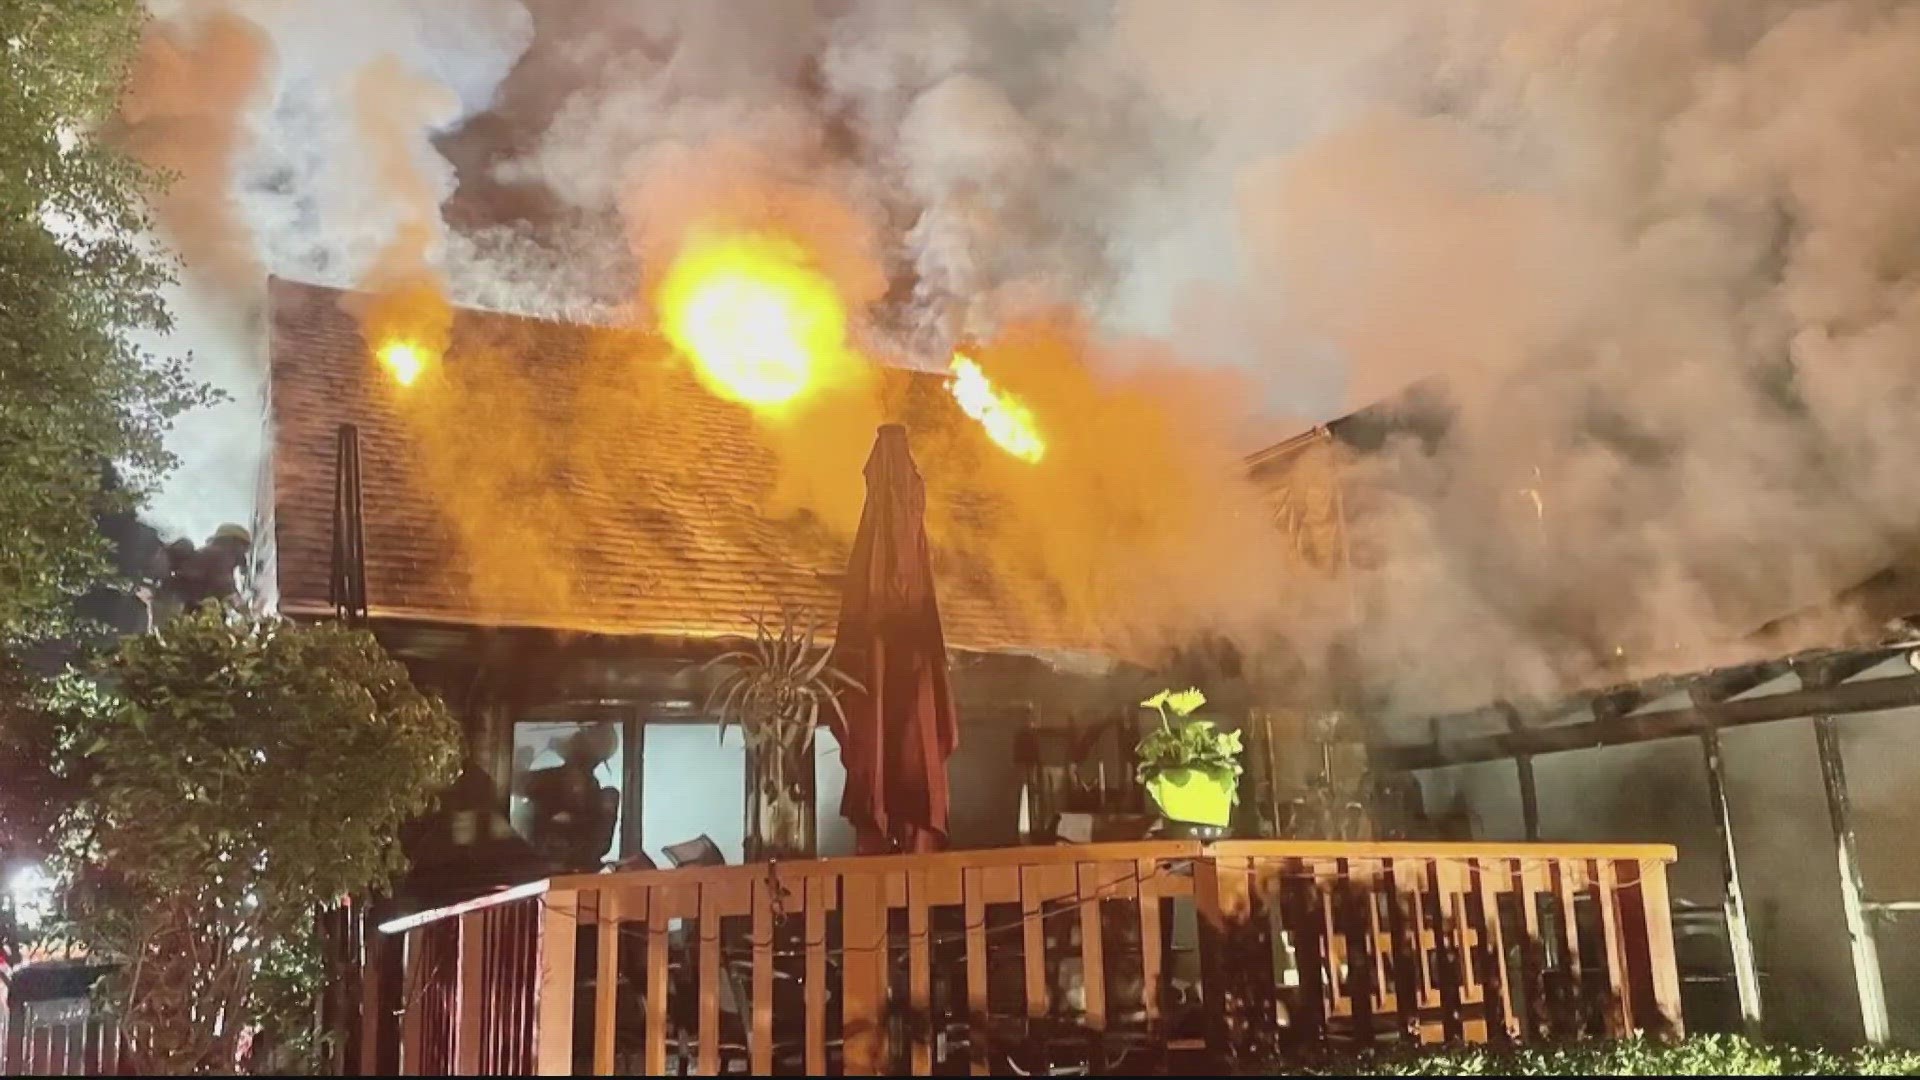 At least 75 firefighters responded to the scene to heavy fire coming out of the home. Pete Piringer said at the time of the fire the temperature was around freezing.